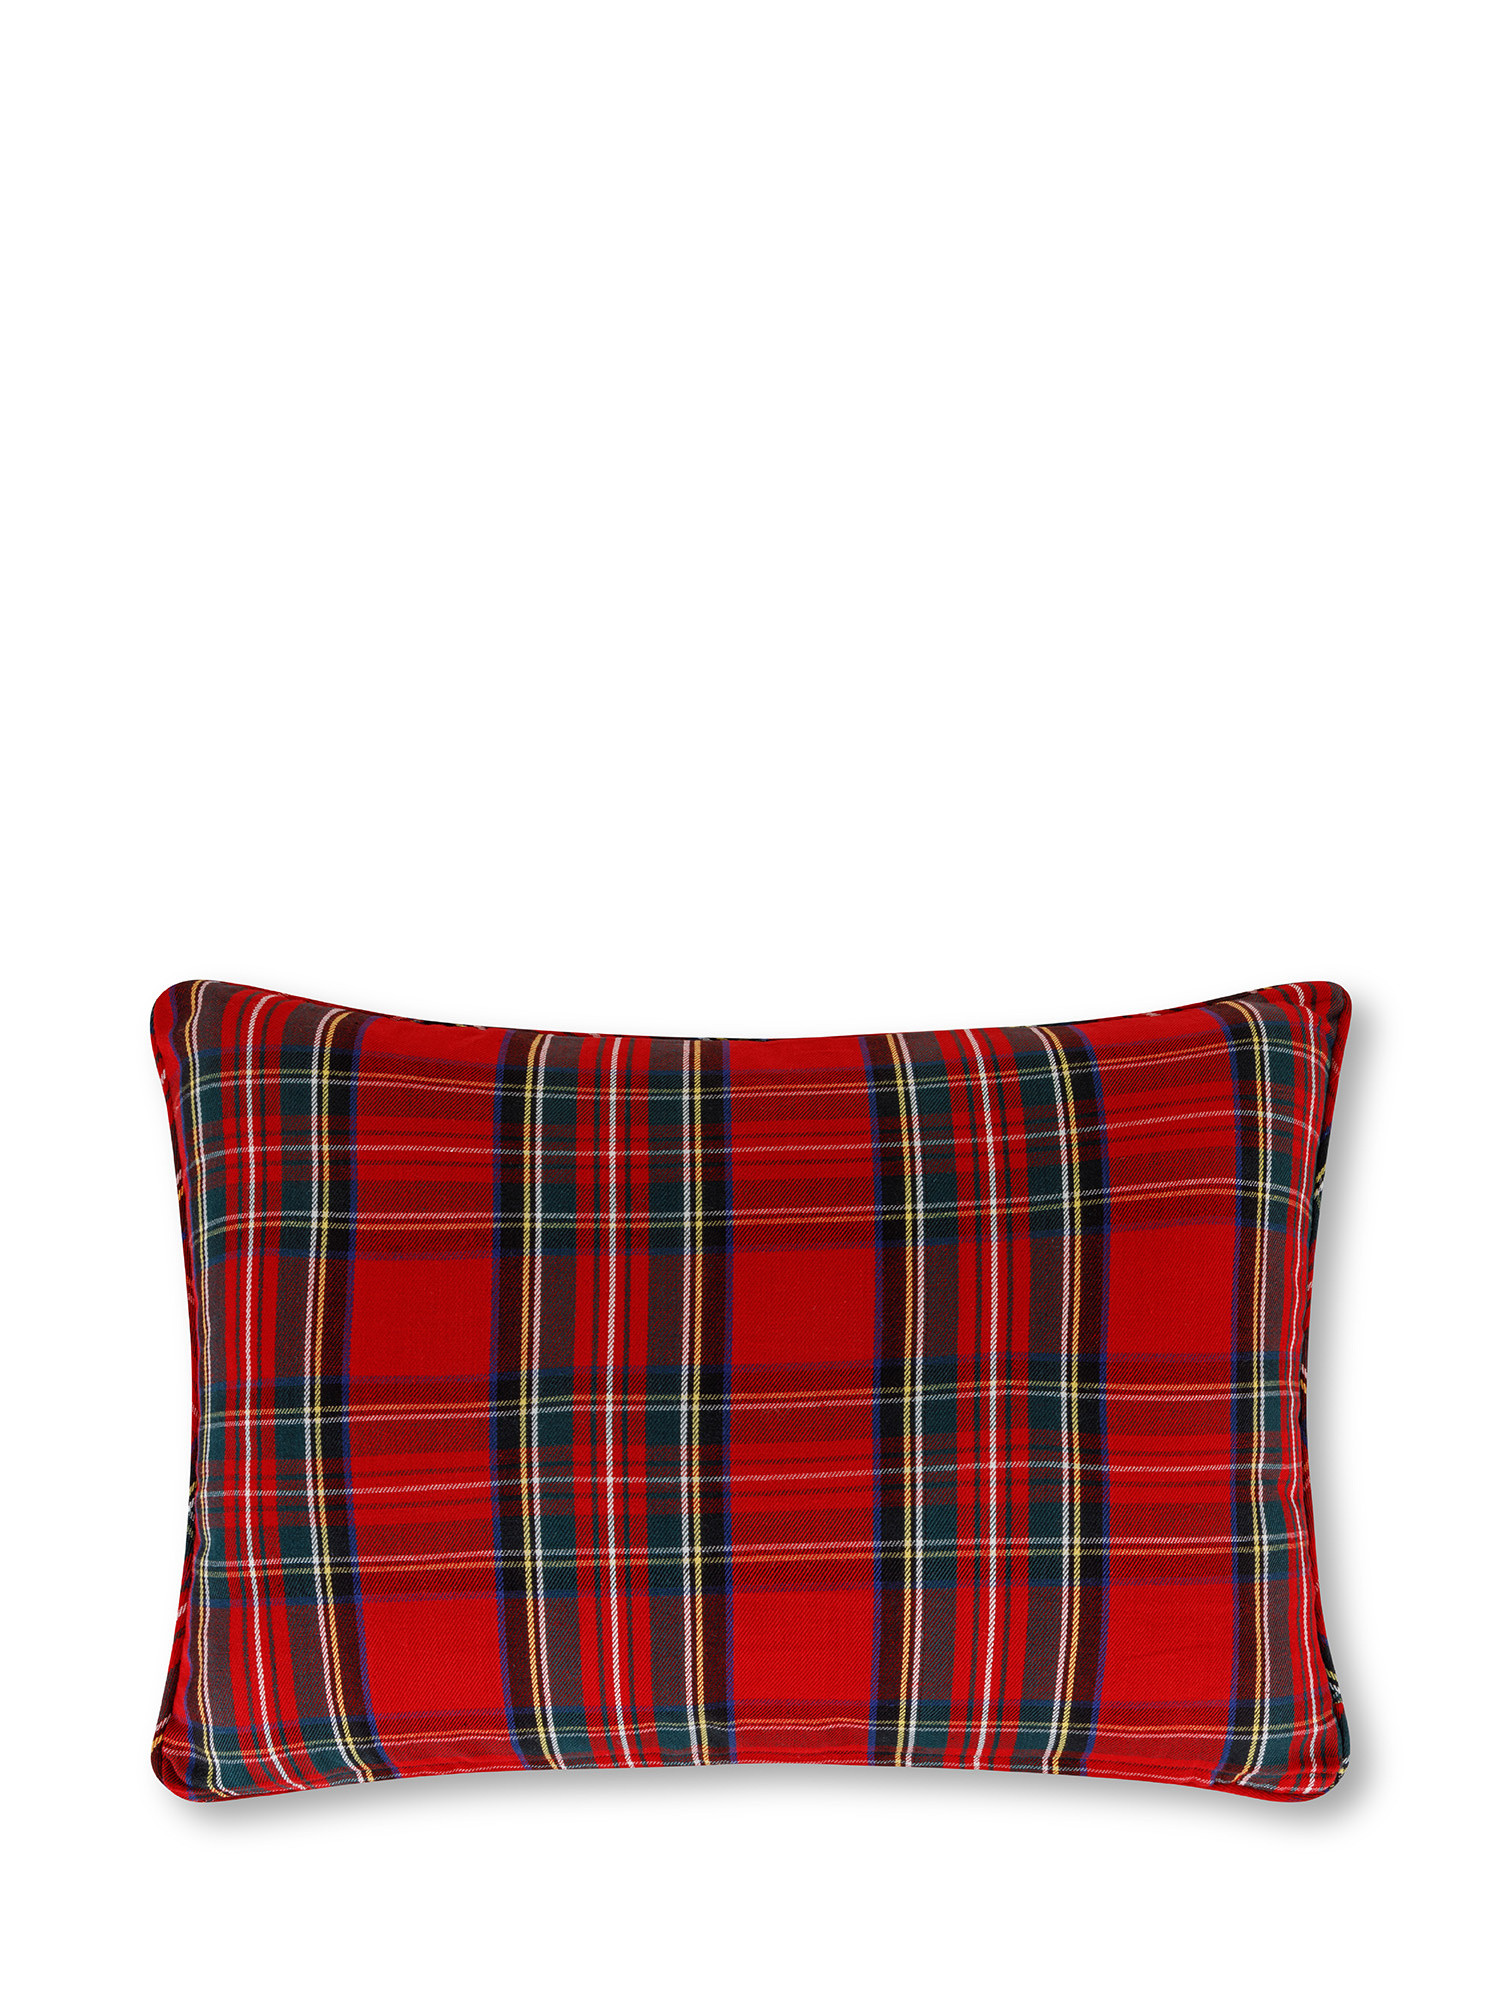 Cuscino in tartan 35x50 cm, Rosso, large image number 0